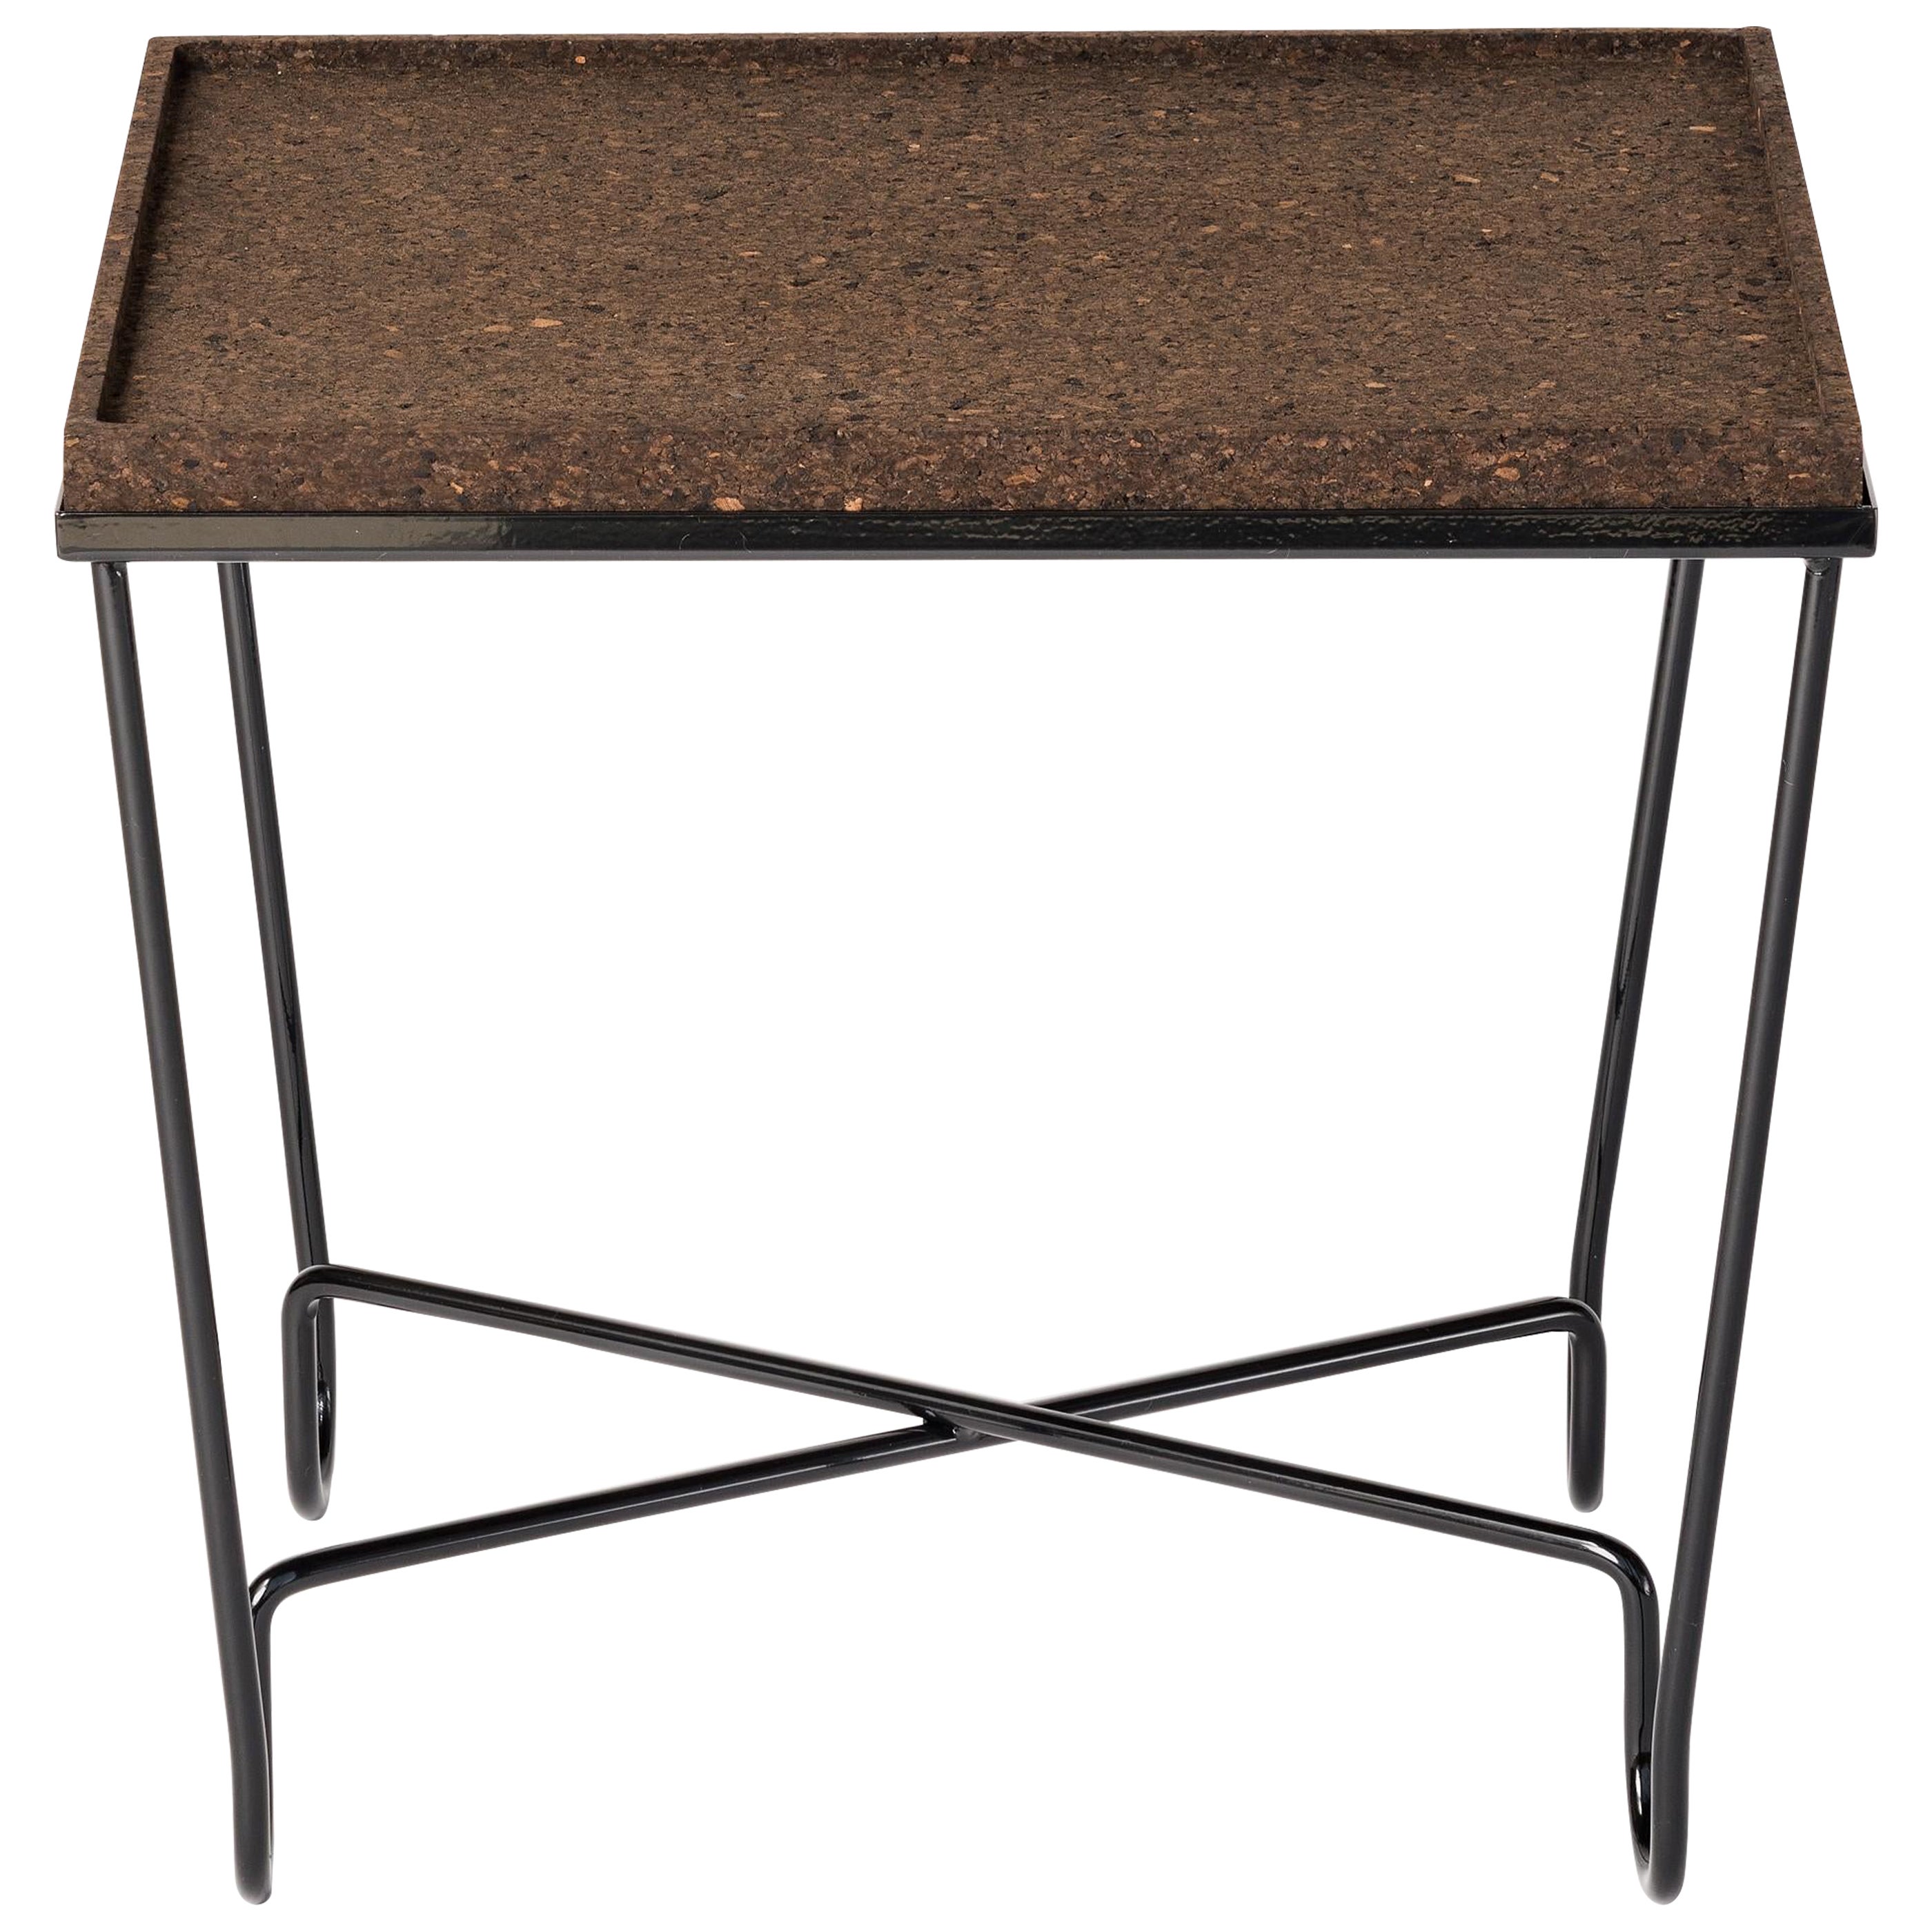 Aronde Black Lacquered Steel Side Table with Burnt or Natural Cork Top 